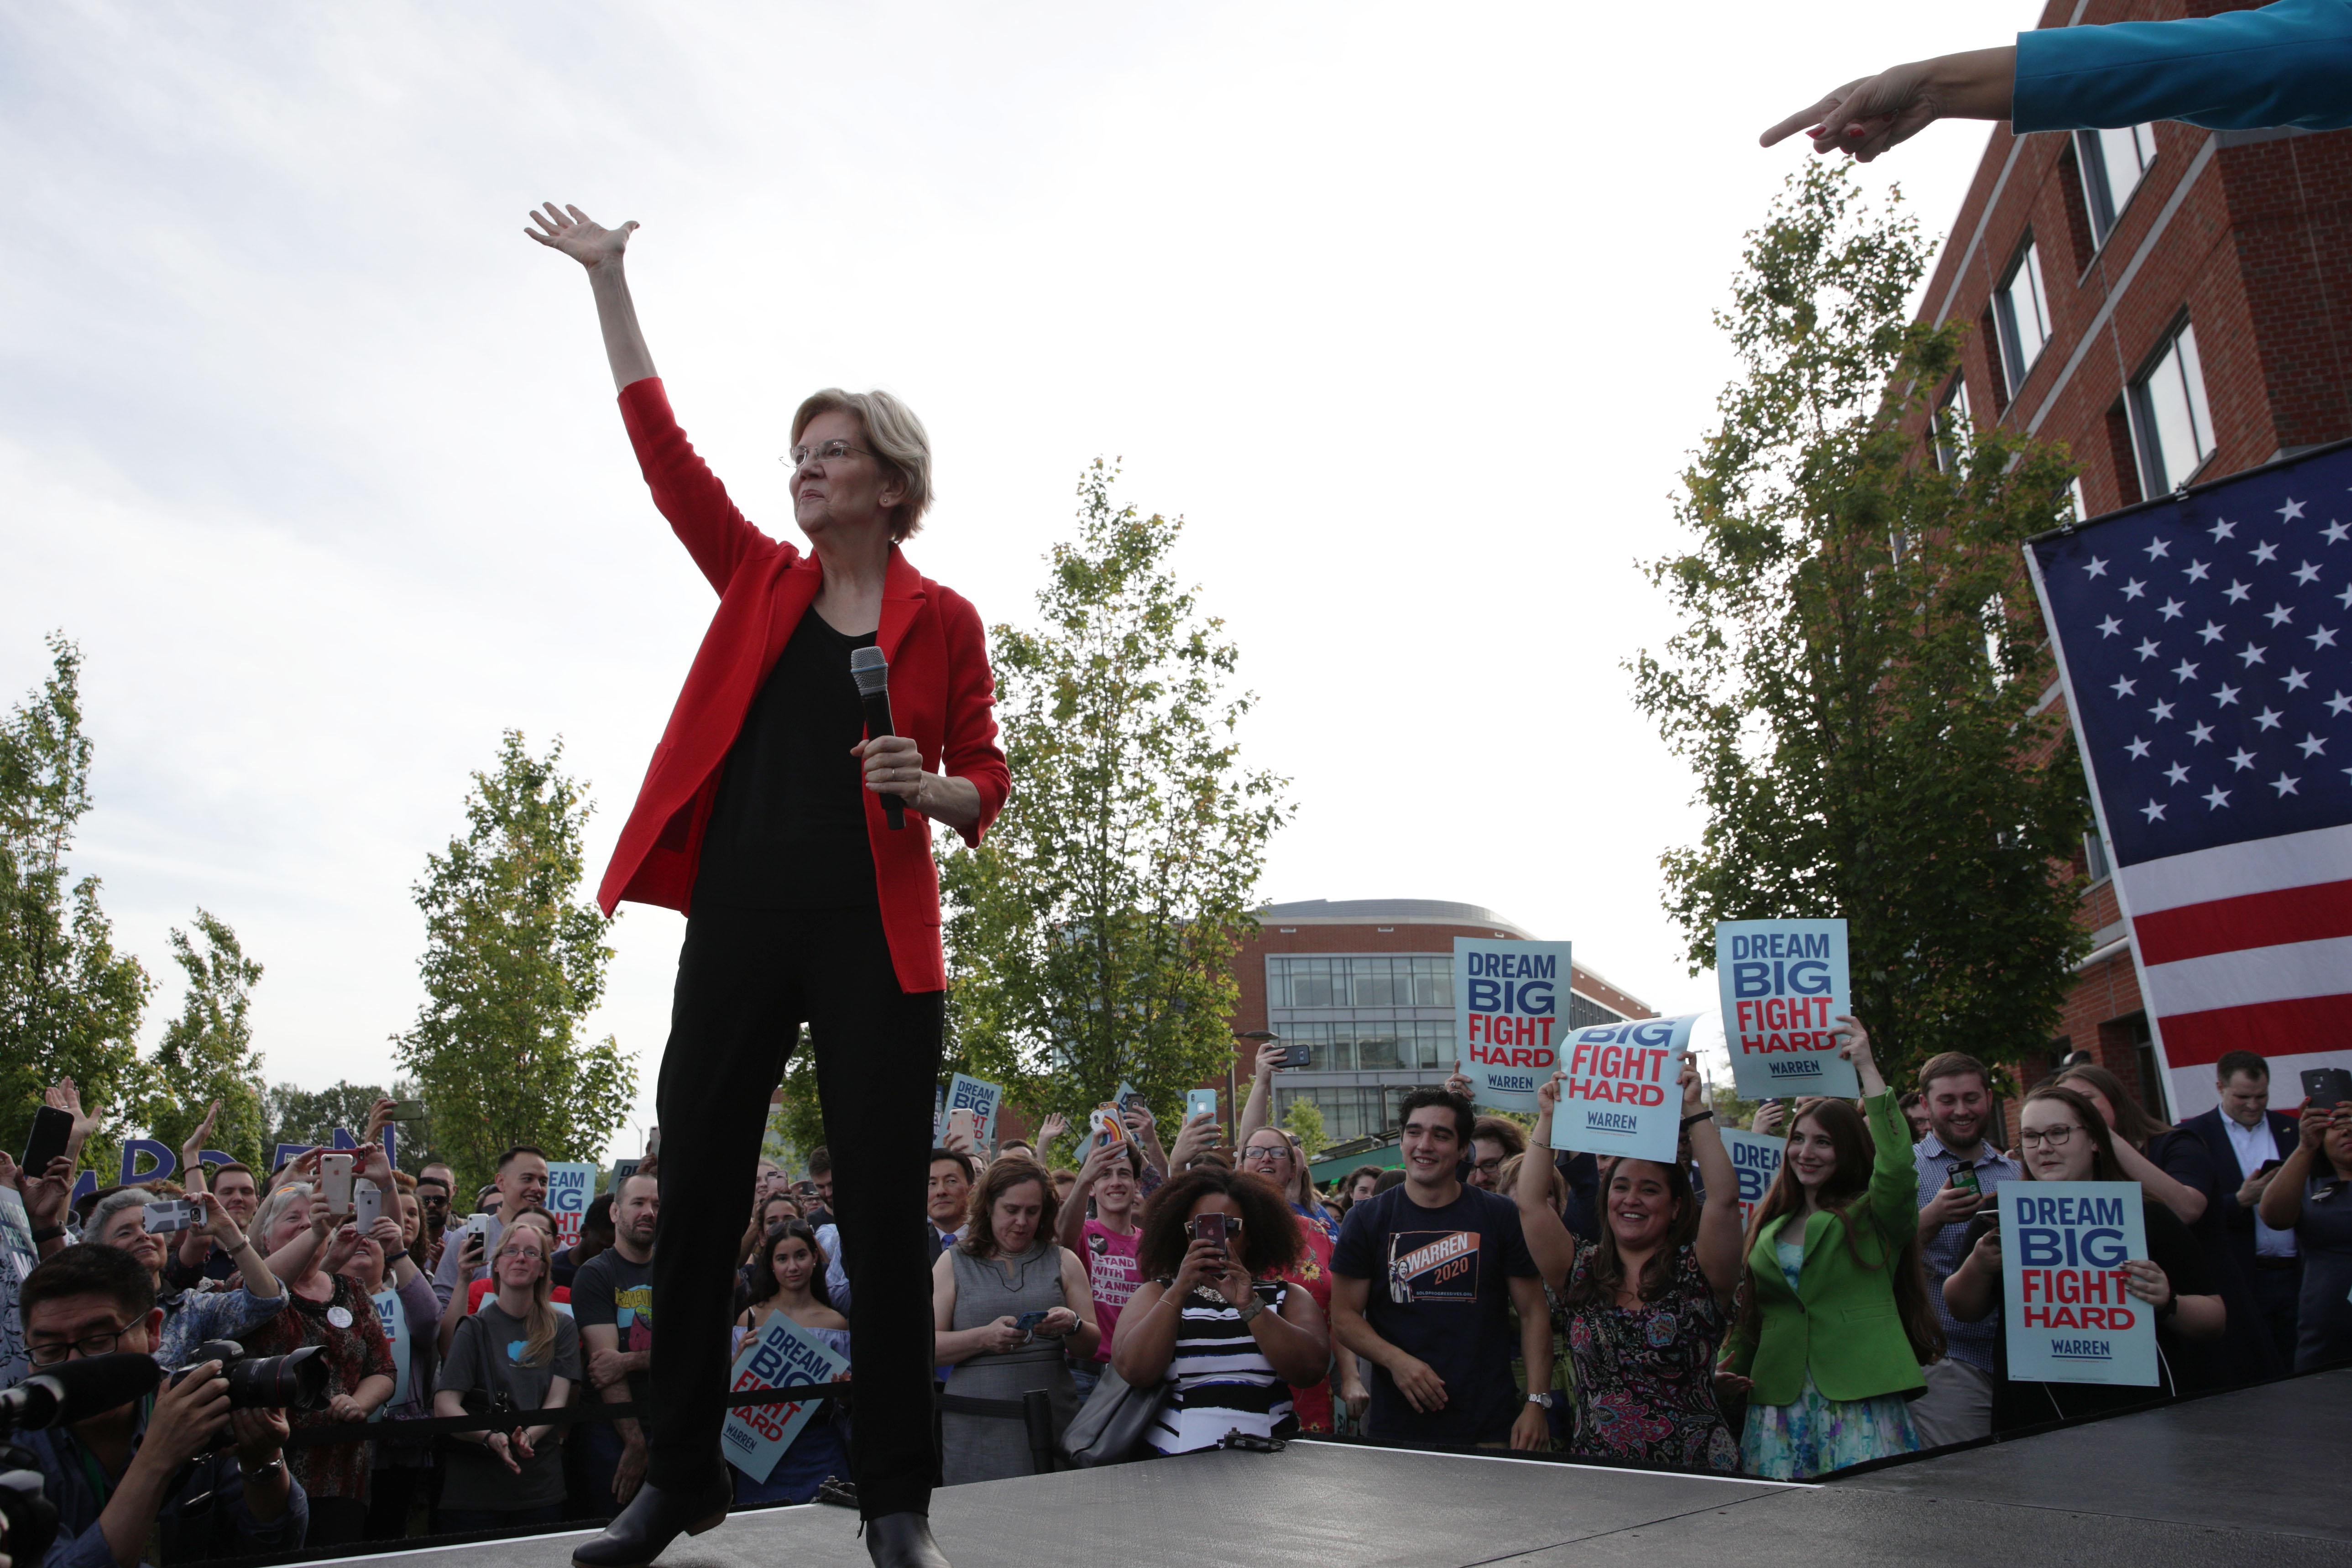 FAIRFAX, VIRGINIA - MAY 16:  Democratic U.S. presidential hopeful Sen. Elizabeth Warren (D-MA) waves during a campaign town hall at George Mason University May 16, 2019 in Fairfax, Virginia. Sen. Warren held a town hall to tell her plans for Americans and answer questions from voters.  (Photo by Alex Wong/Getty Images)